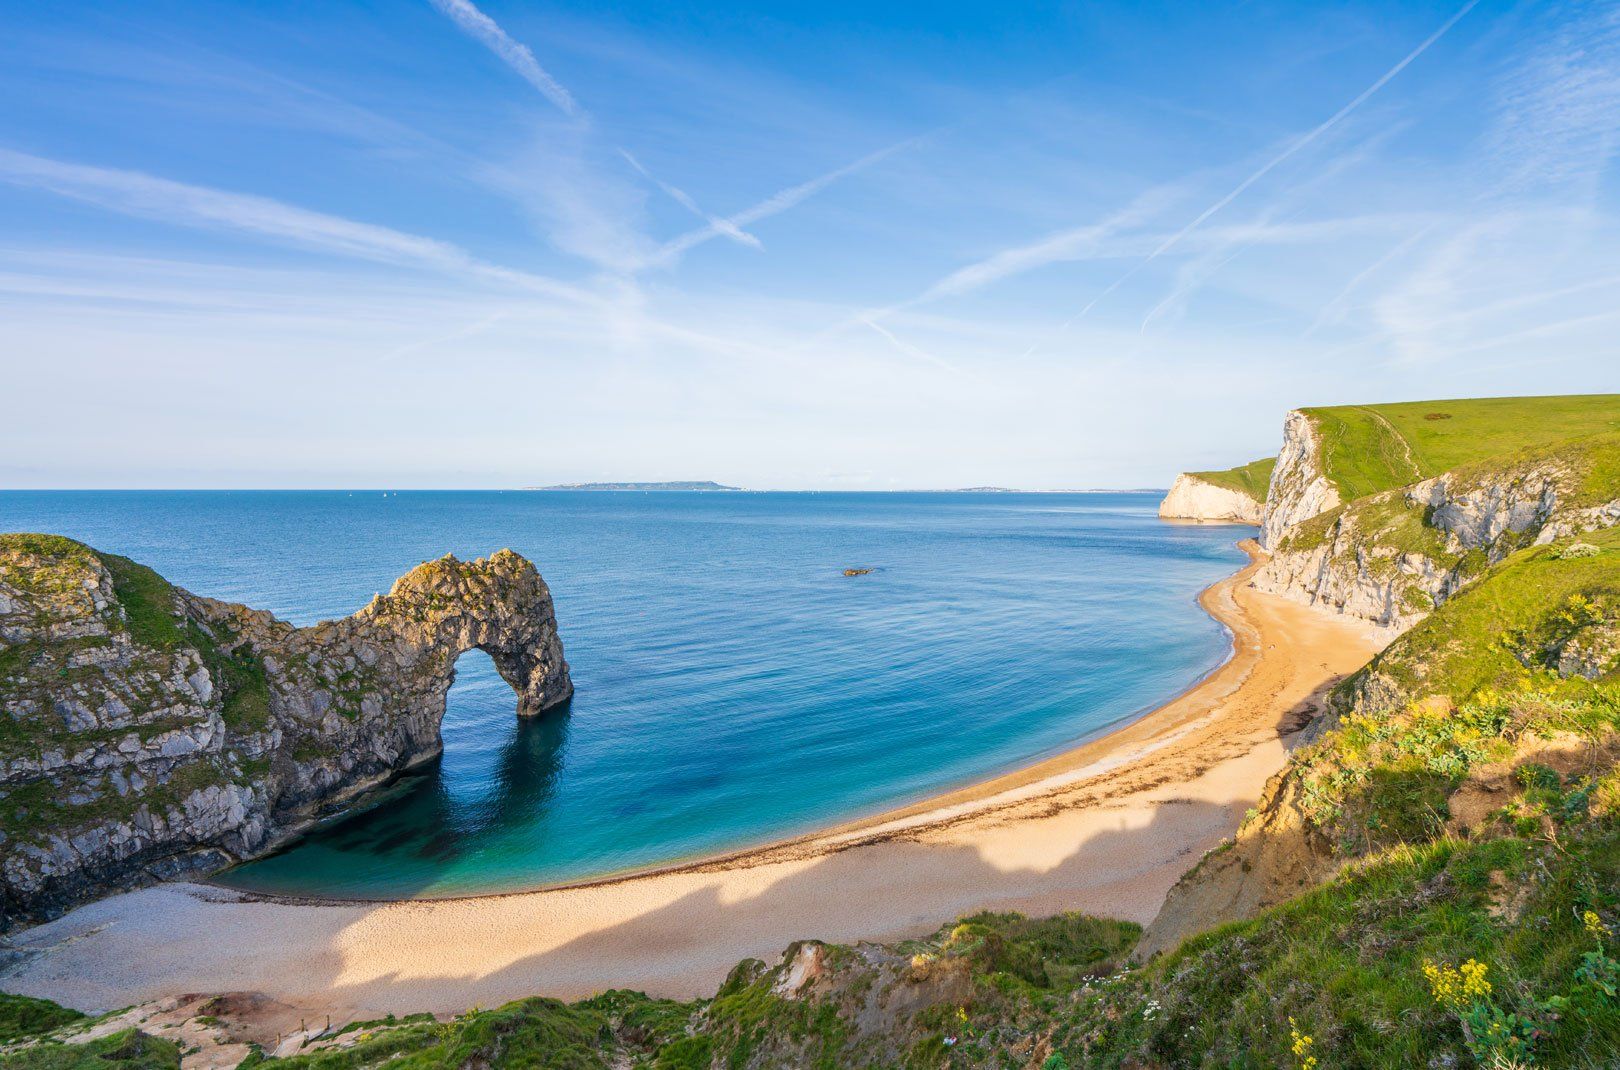 Scenic overhead view of Durdle Door, an iconic rock arch on a sandy beach along the Jurassic Coast in Dorset, England